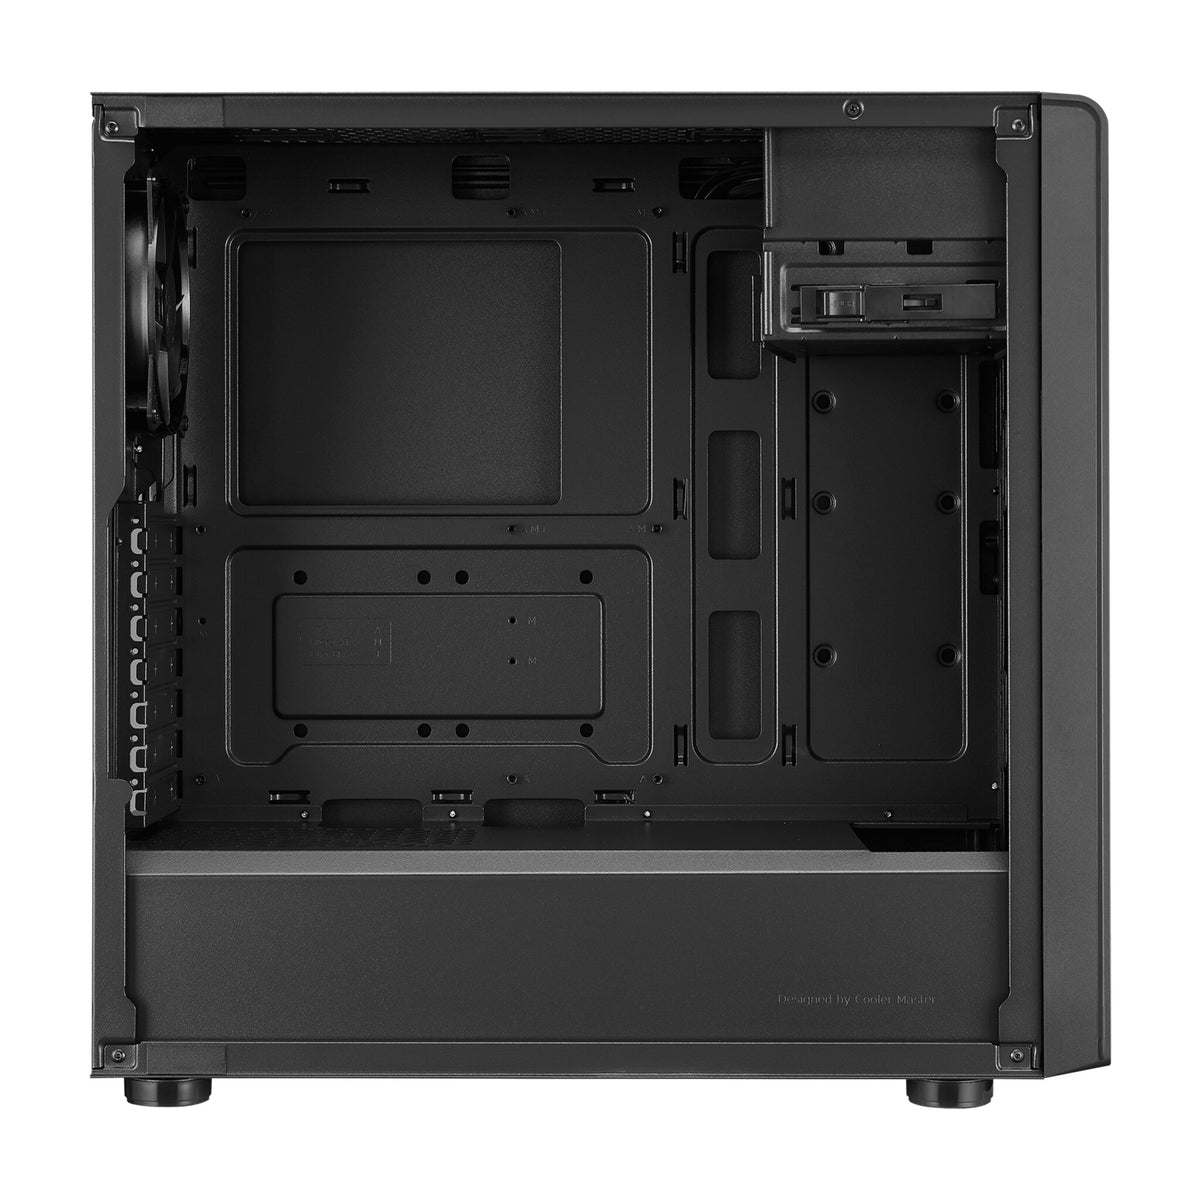 Cooler Master Elite 500 - ATX Mid Tower Case in Black (with ODD)